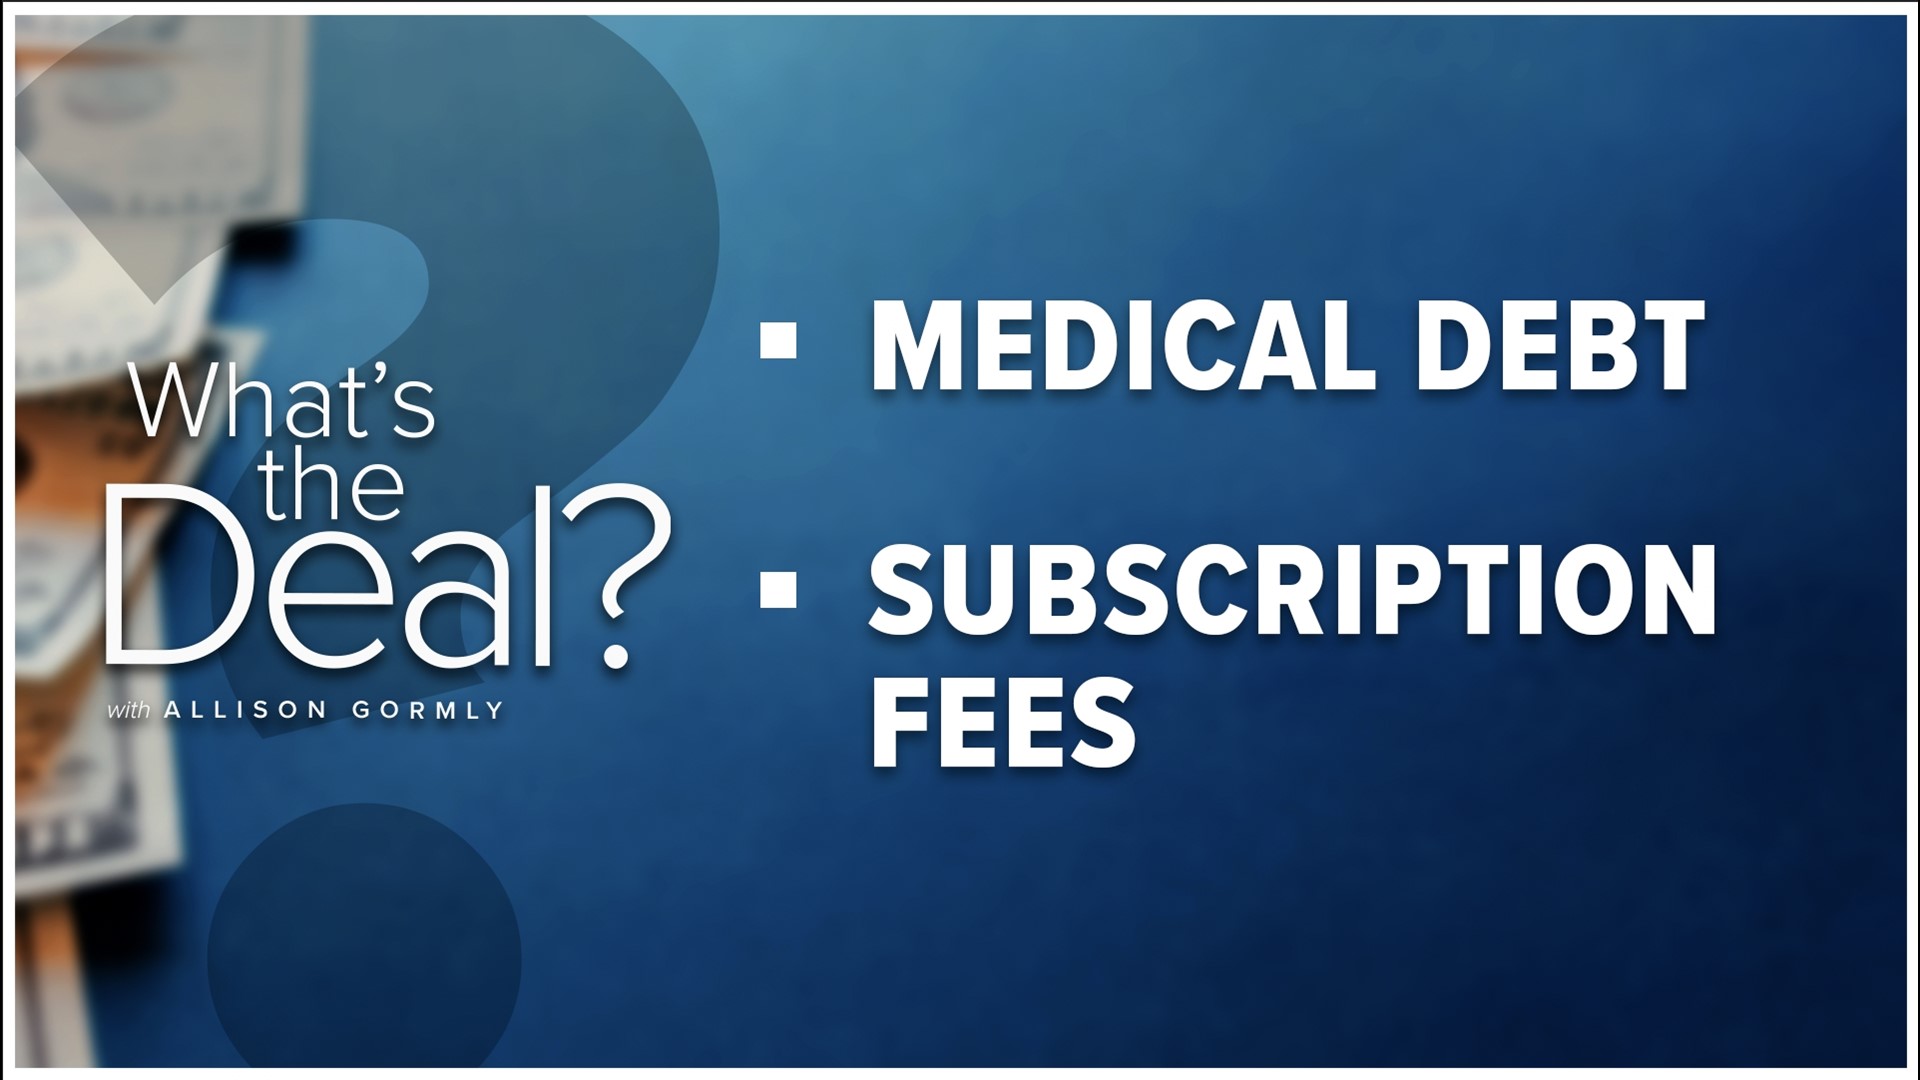 We tell you what's the deal with everything from medical debt to subscription fees.